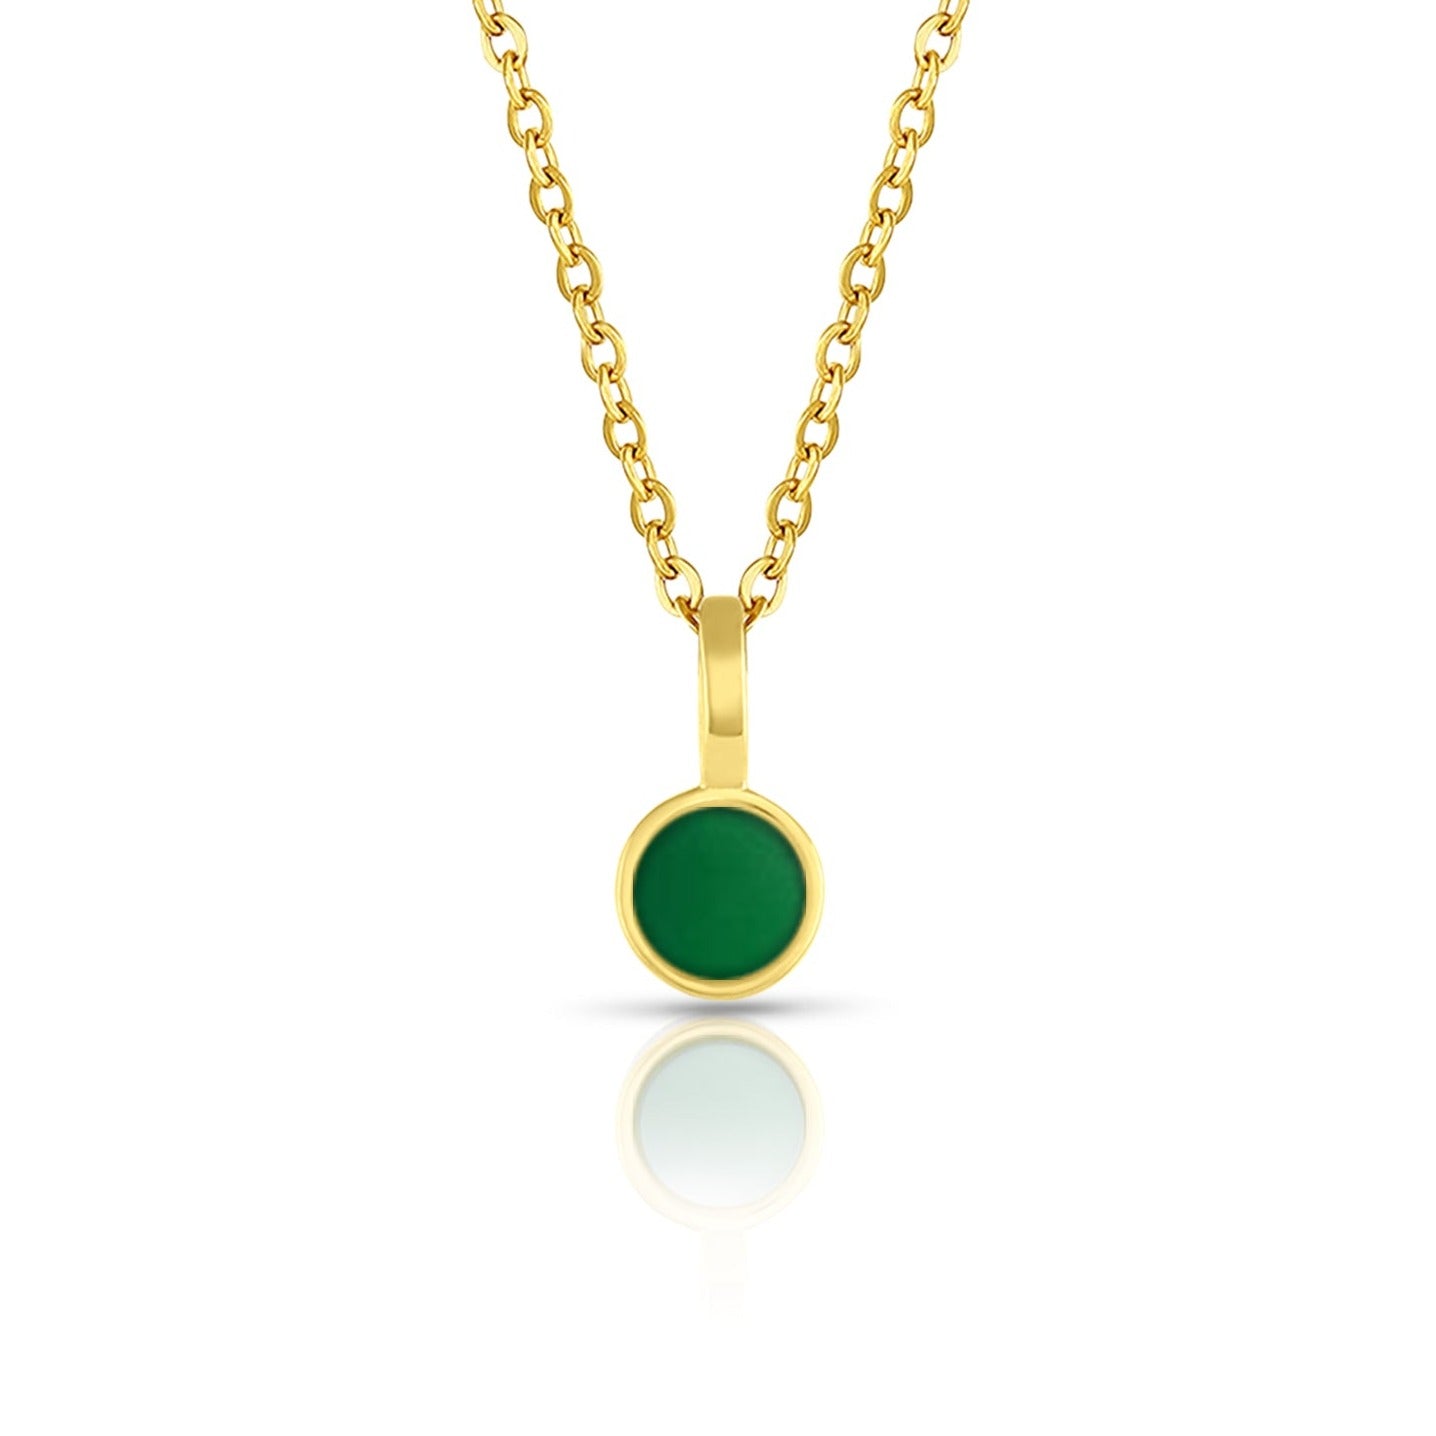 5mm Round Charm Necklace in Green Round Natural Agate Gemstone made by Born to Rock Jewelry